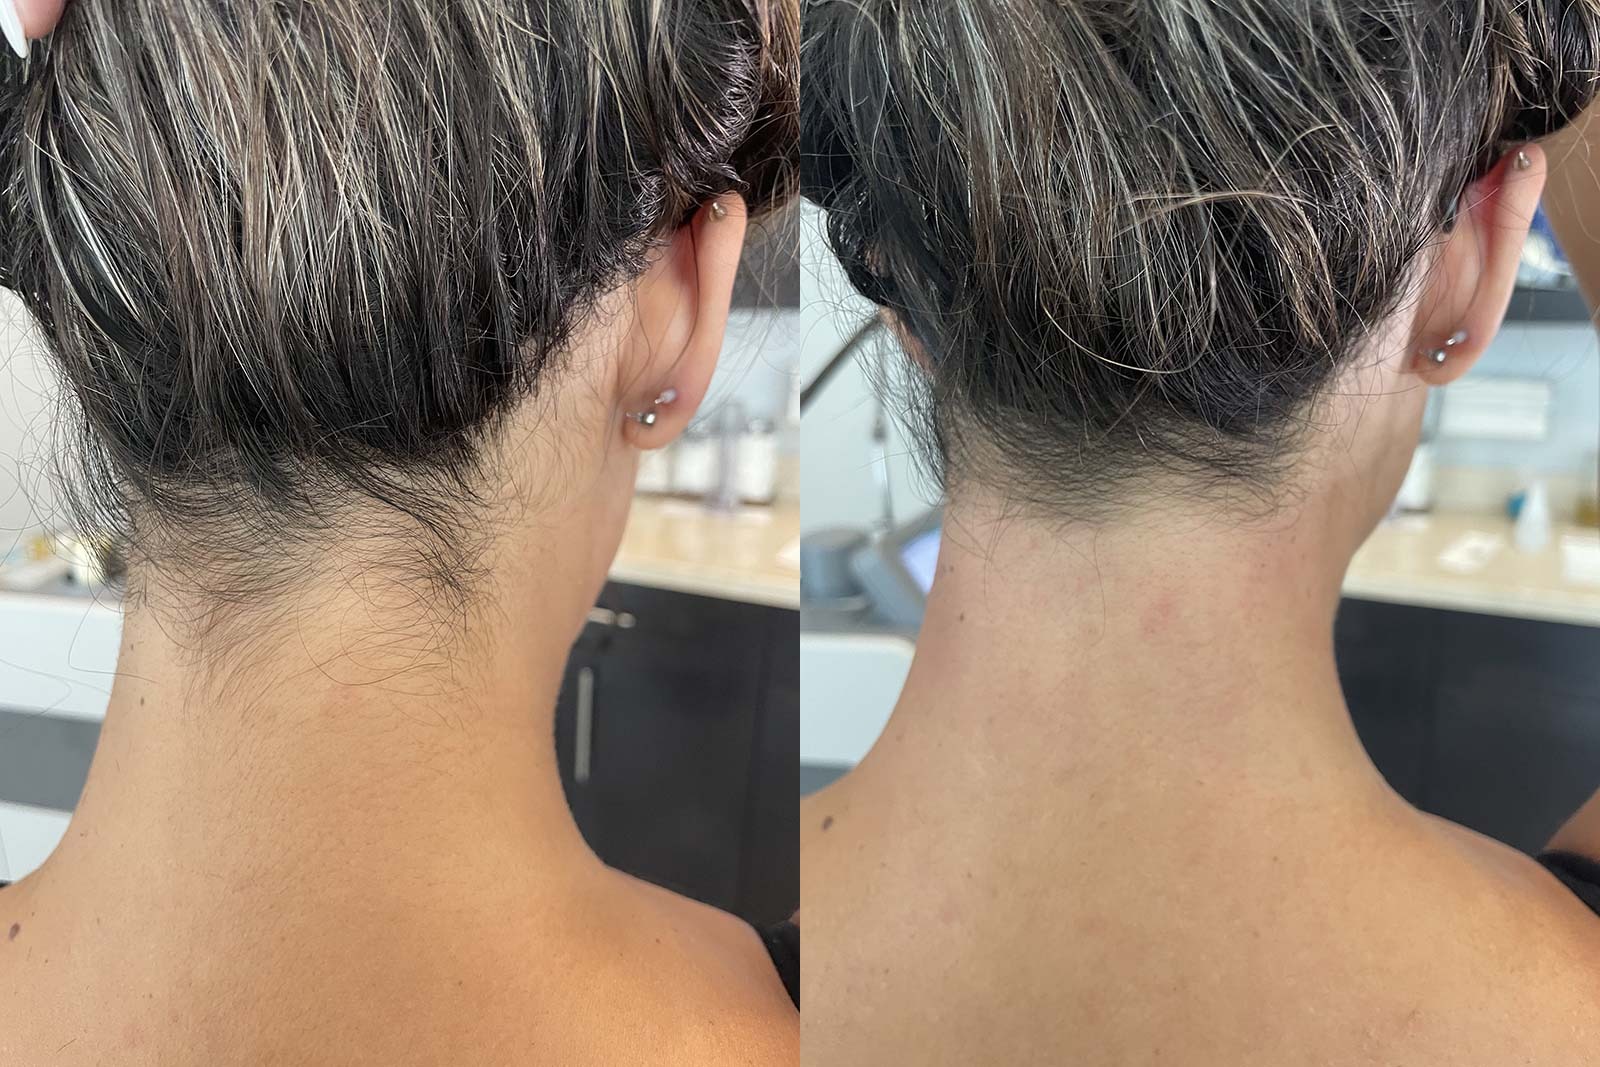 Laser hair removal Before and After Photo by Refresh Palm Beach Medical Aesthetics in Jupiter Florida